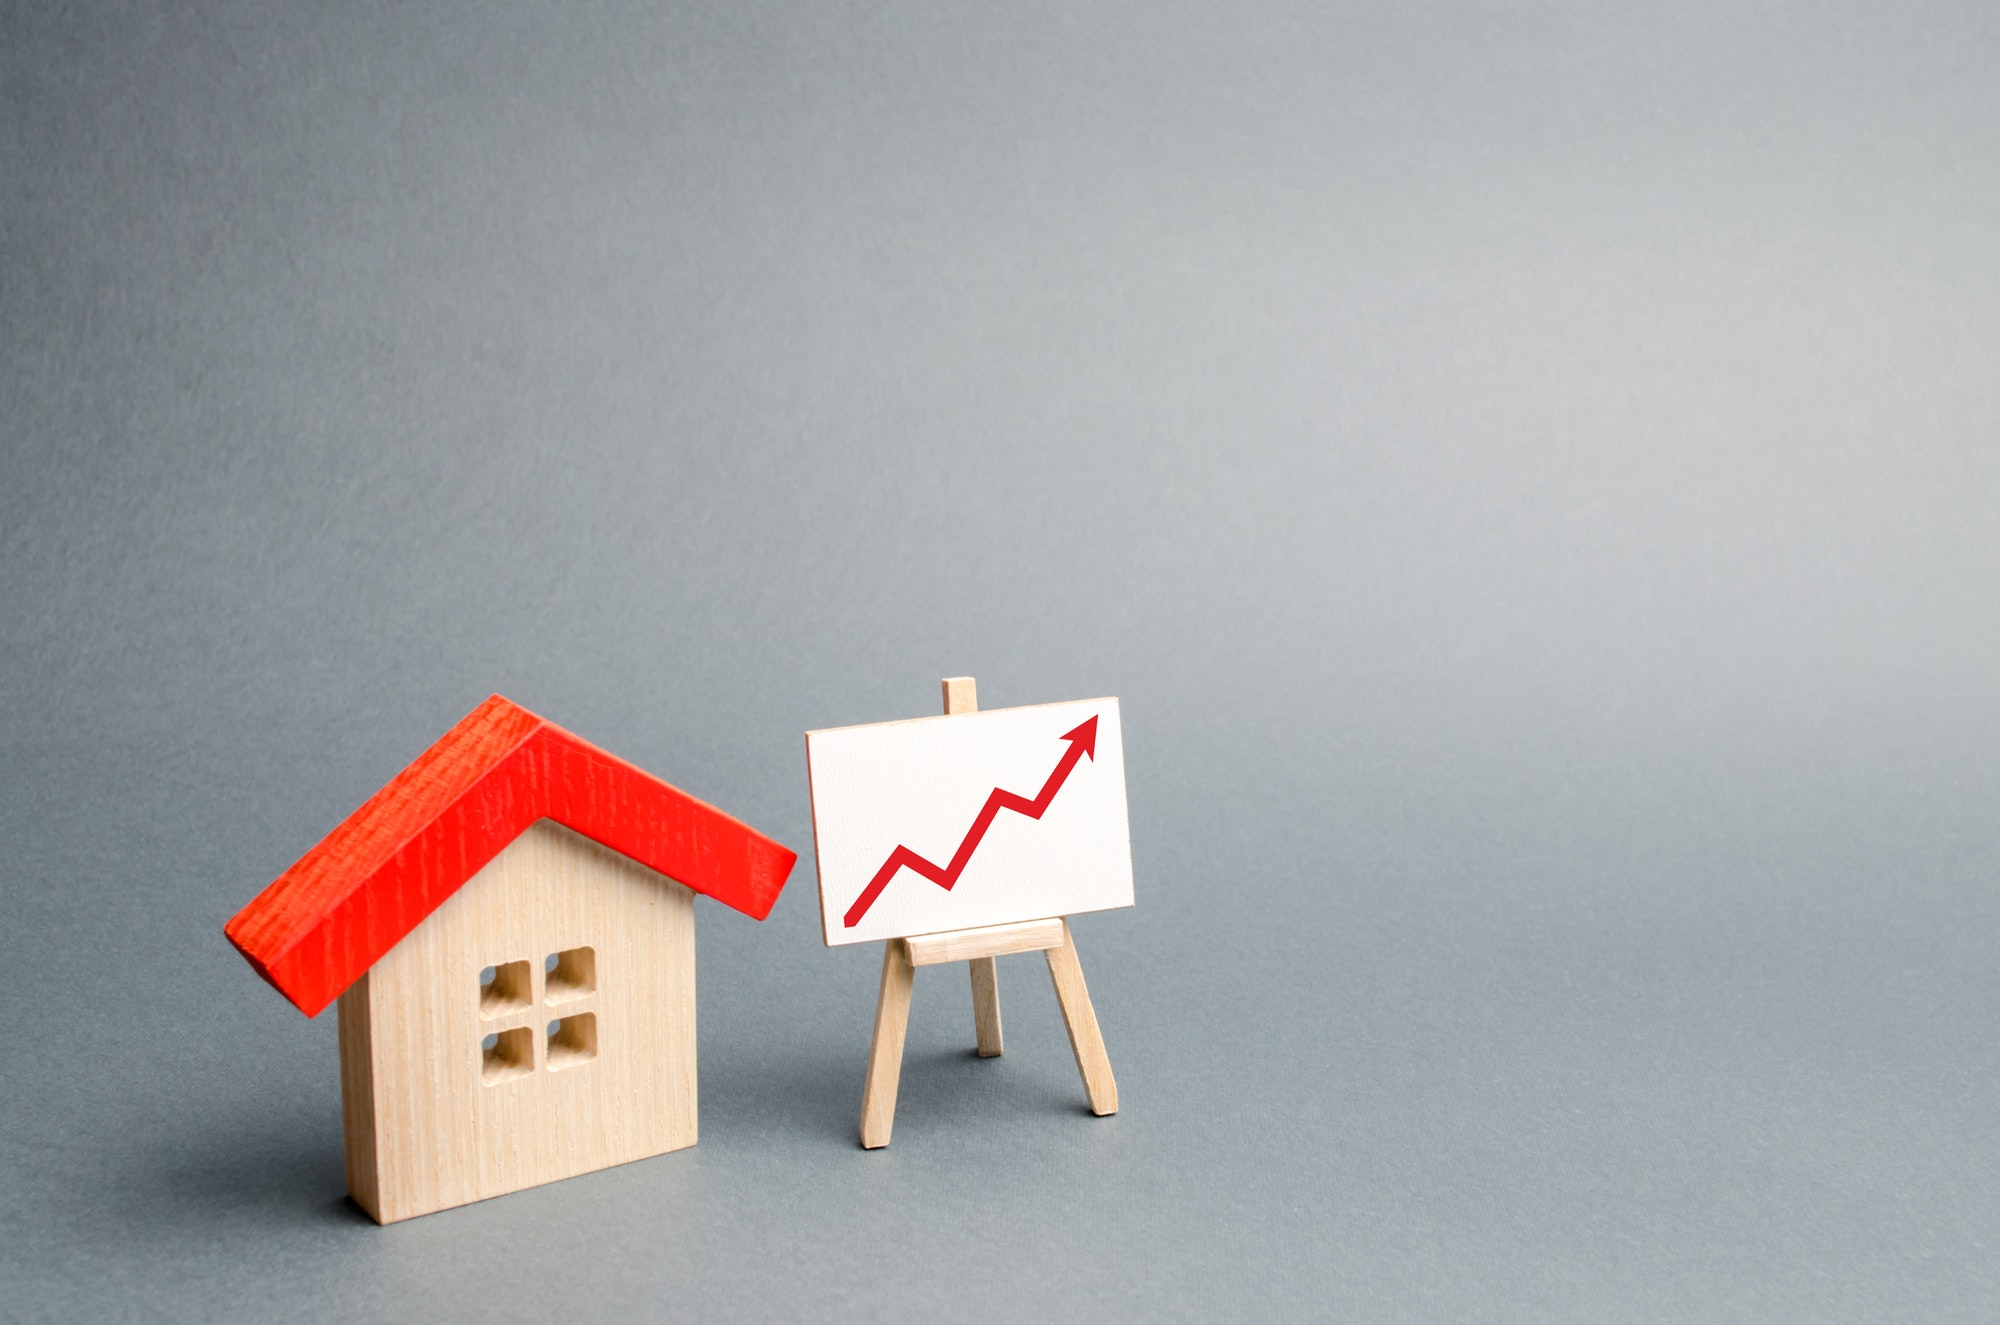 Housing prices up 0.3% in Q1